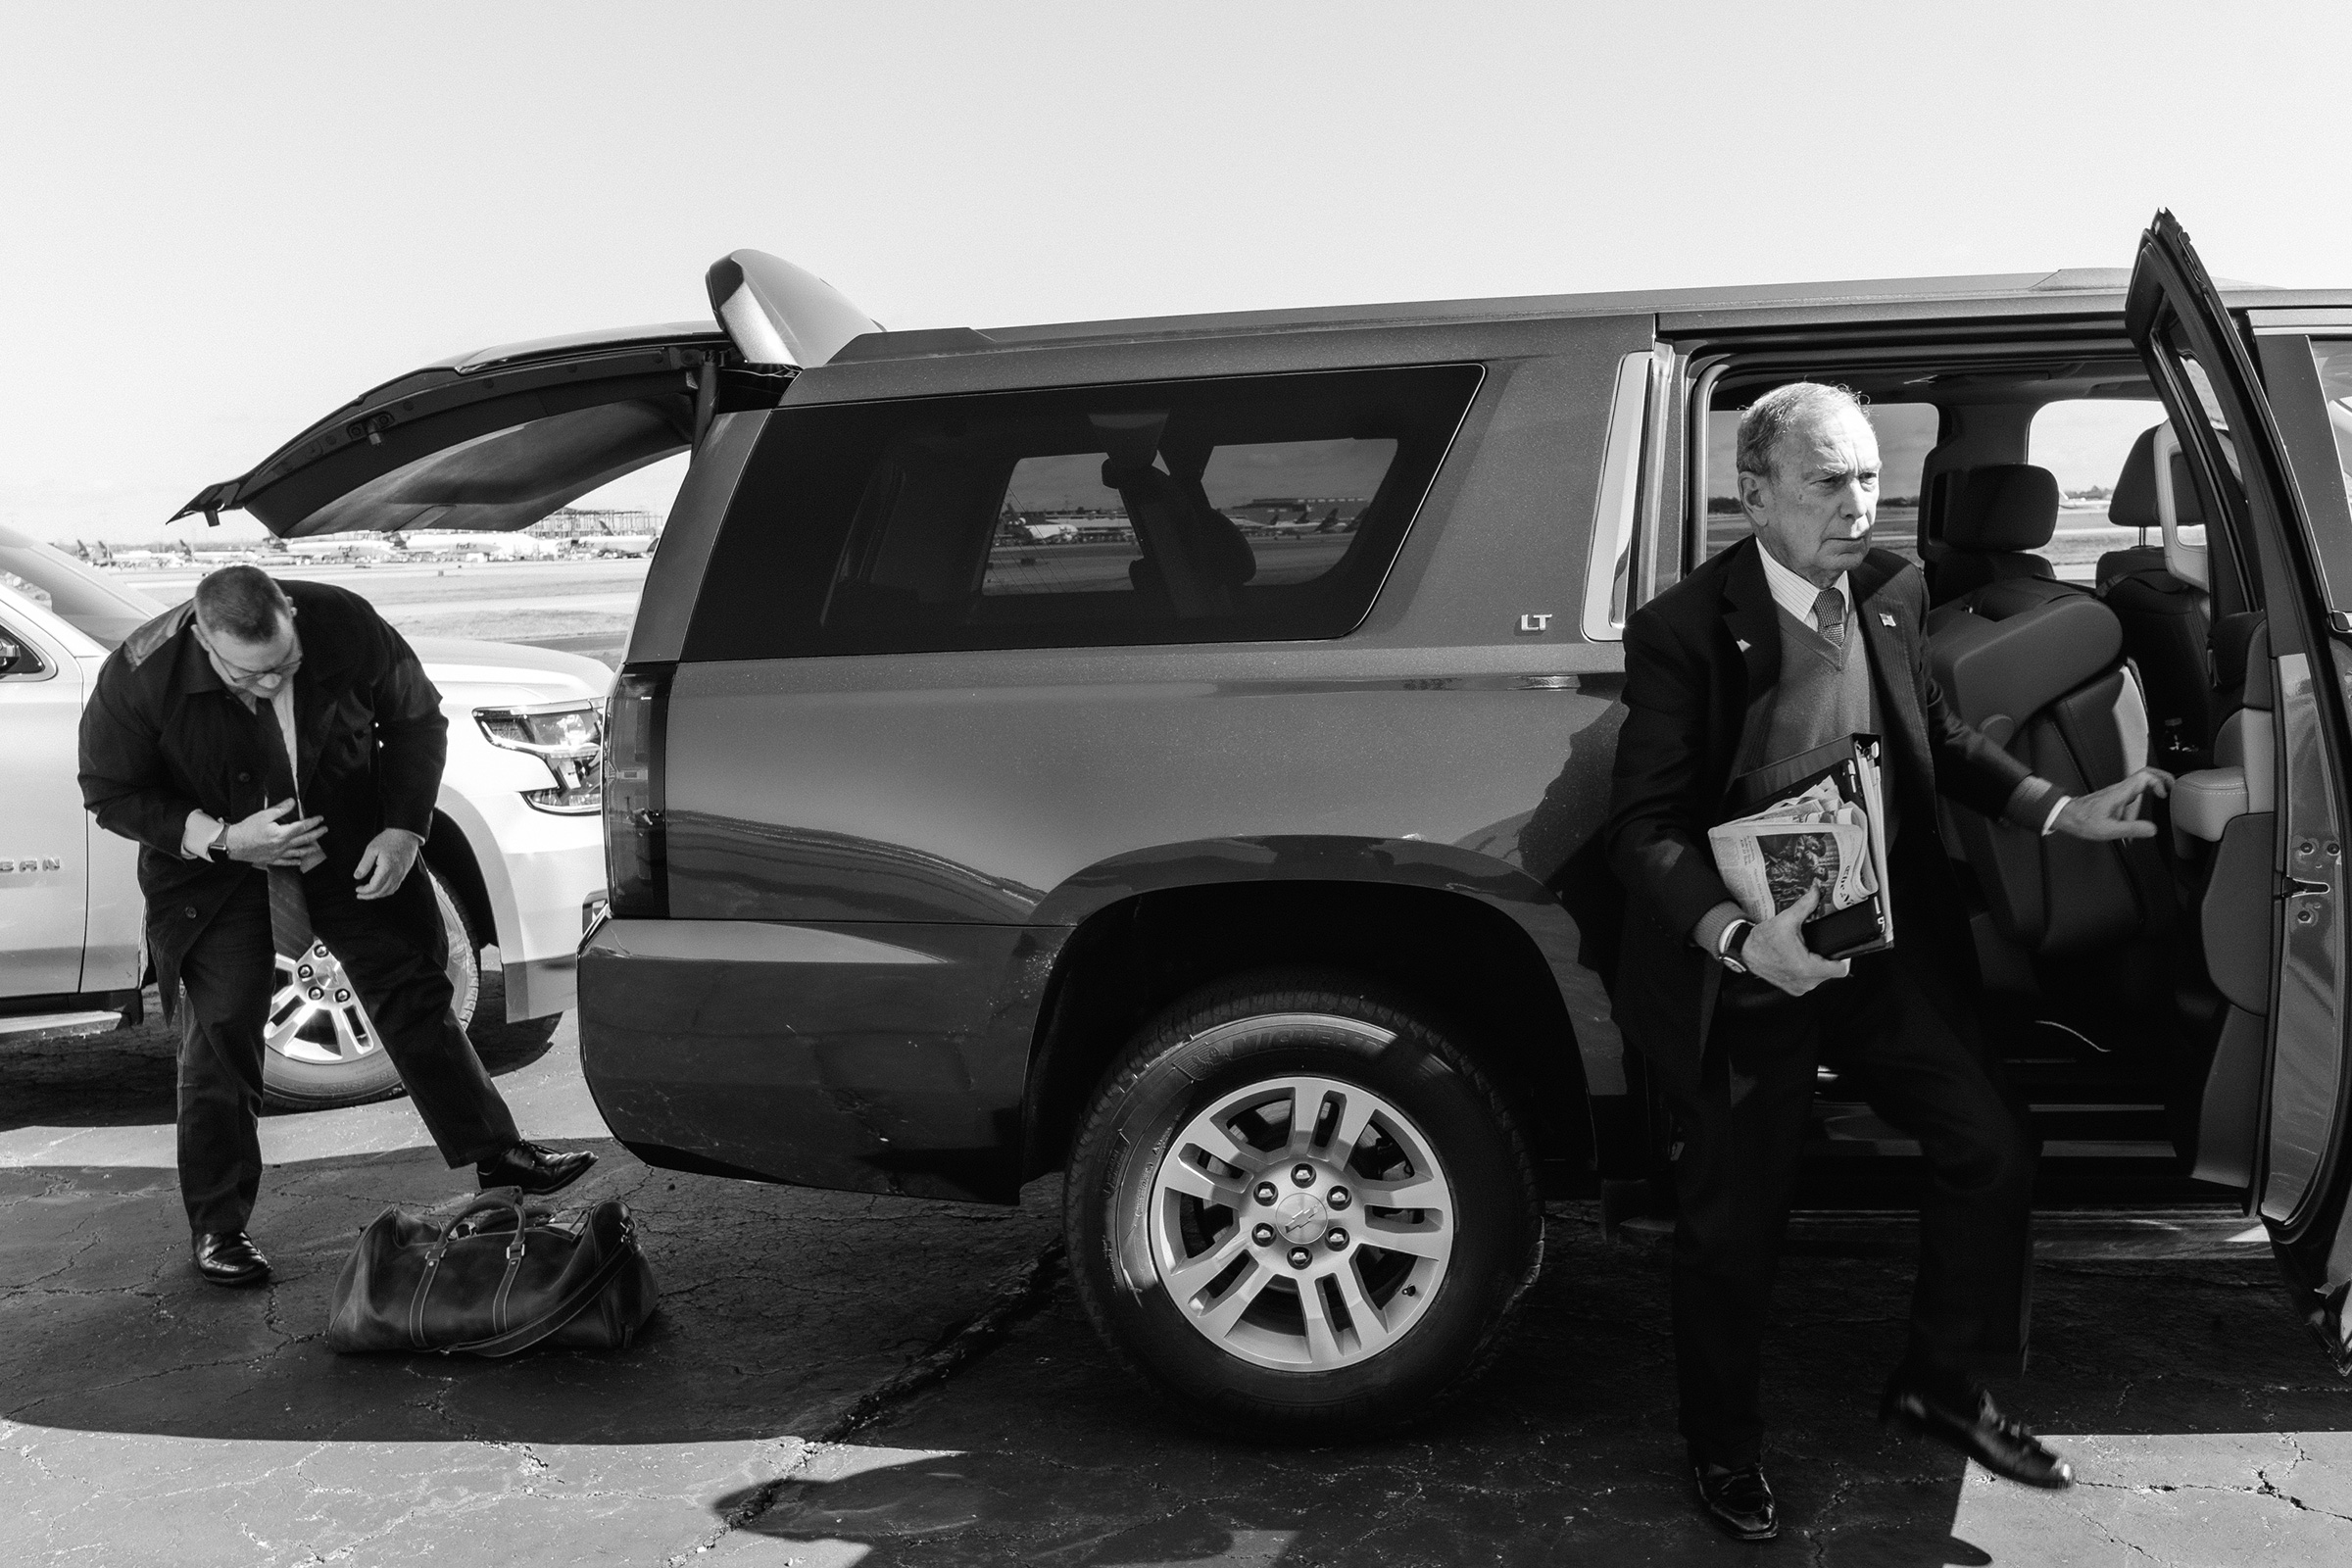 Memphis, Tennessee - February 28, 2020: Former New York City Mayor and 2020 presidential candidate Mike Bloomberg is seen in a vehicle with a member of his staff after a political rally en route to an airfield where a private jet awaits him in Memphis, Tennessee ahead of Super Tuesday primary voting in key states around the country on February 28, 2020. Photo: Christopher Lee for TIME